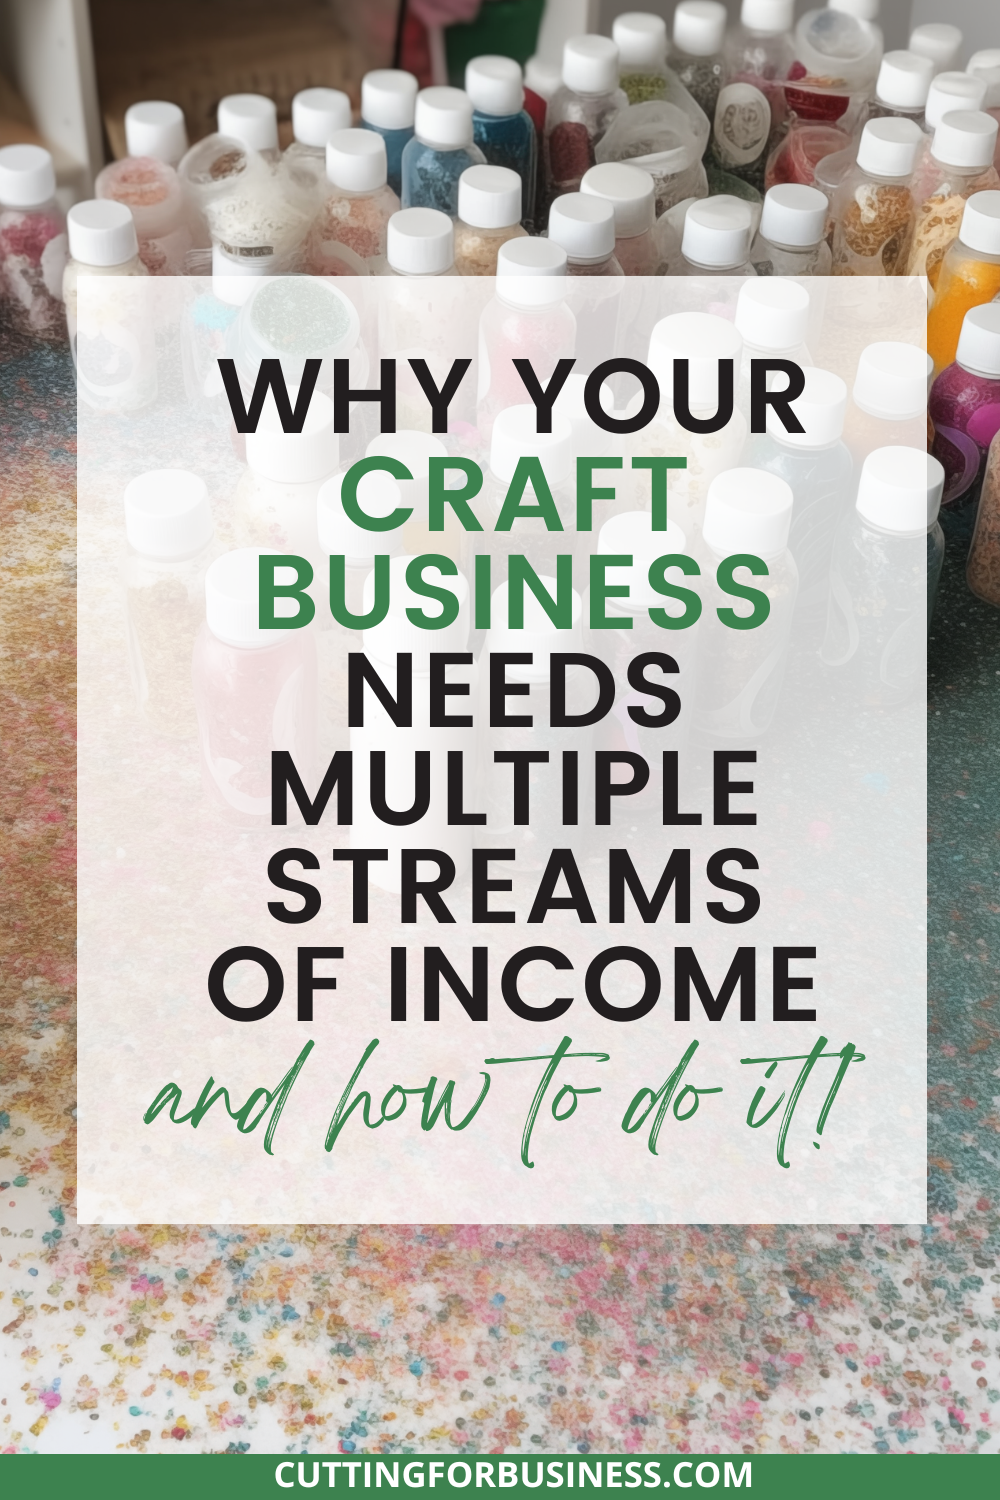 Why Your Craft Business Needs Multiple Streams of Income & How to Do It - cuttingforbusiness.com